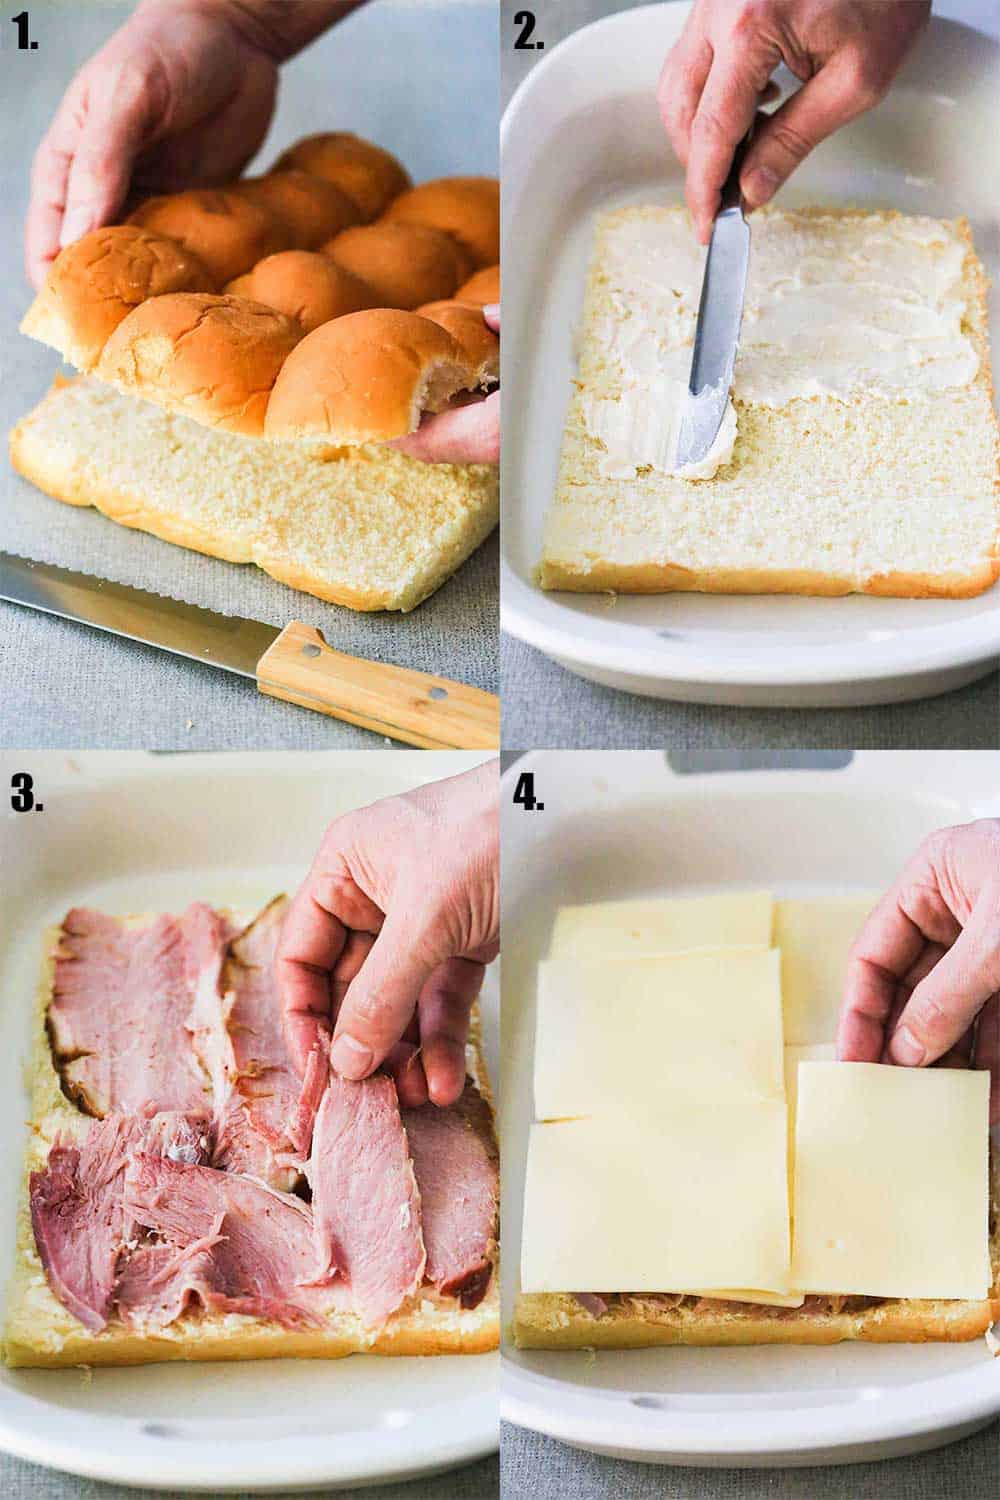 Four images of the process of building a ham and cheese sliders starting with slicing the buns, then adding layers of mayo, ham, and cheese. 